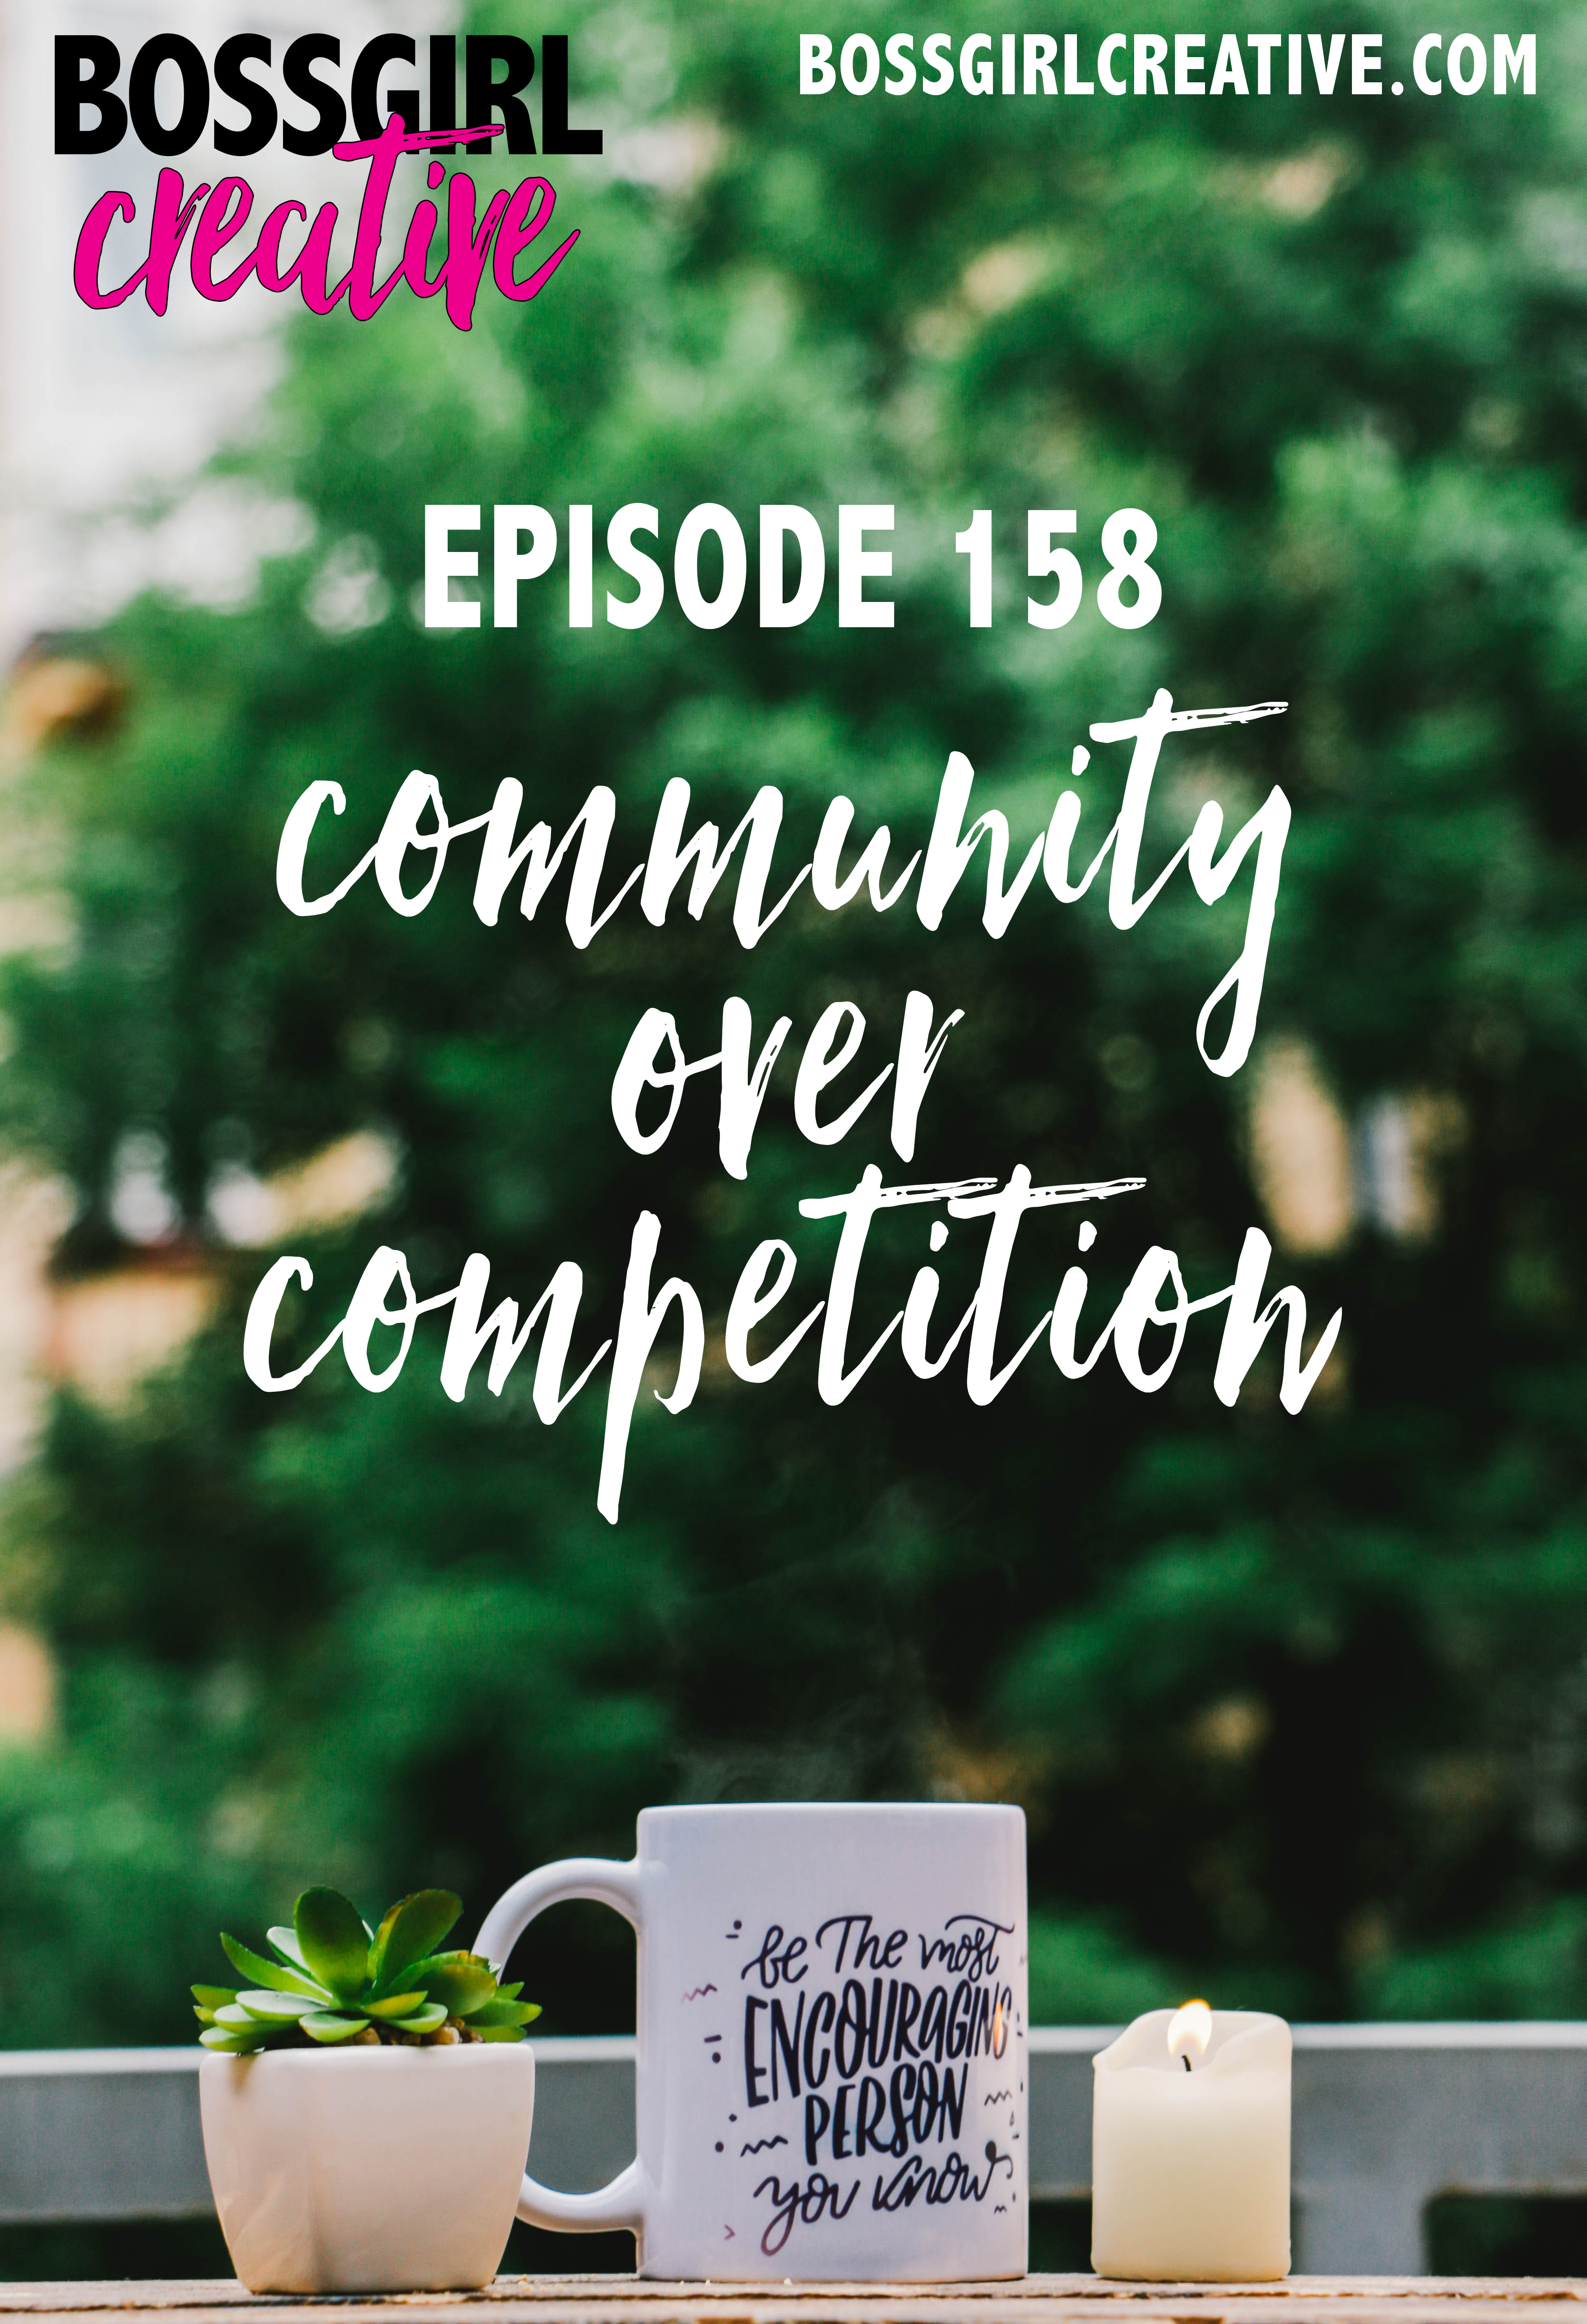 Community Over Competition -- what is that exactly? Take a listen as I speak to this movement in Episode 158 of the Boss Girl Creative podcast.